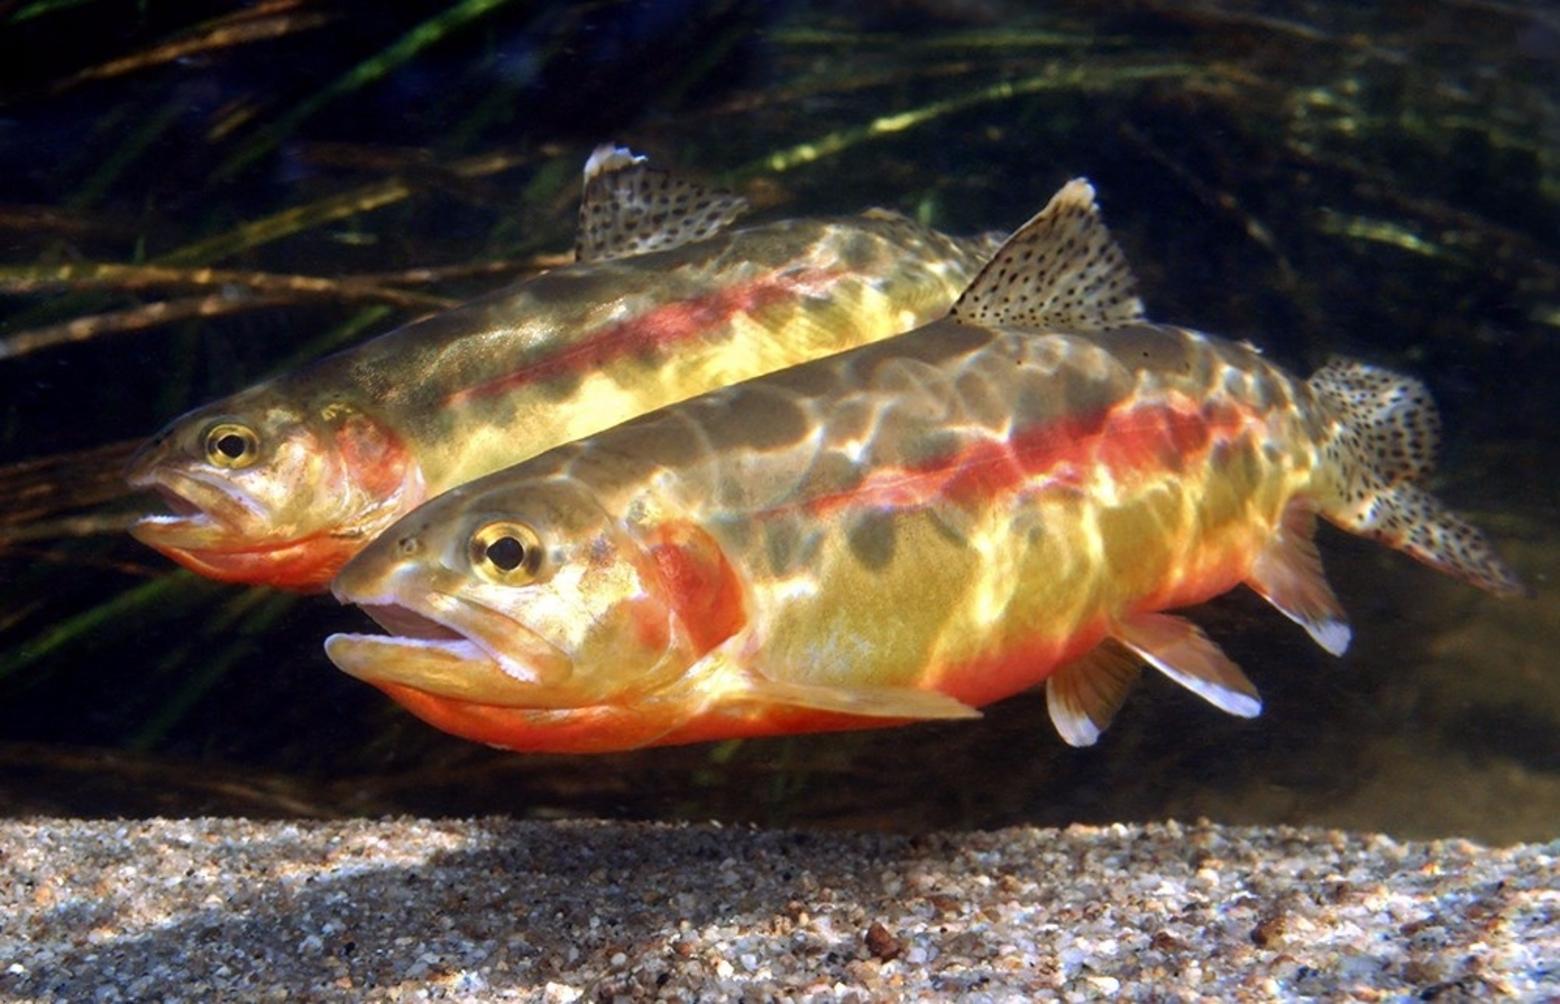 Golden trout, high in the Wind River Mountains, Wyoming where glaciers are rapidly disappearing from climate change. Photo courtesy Pat Clayton